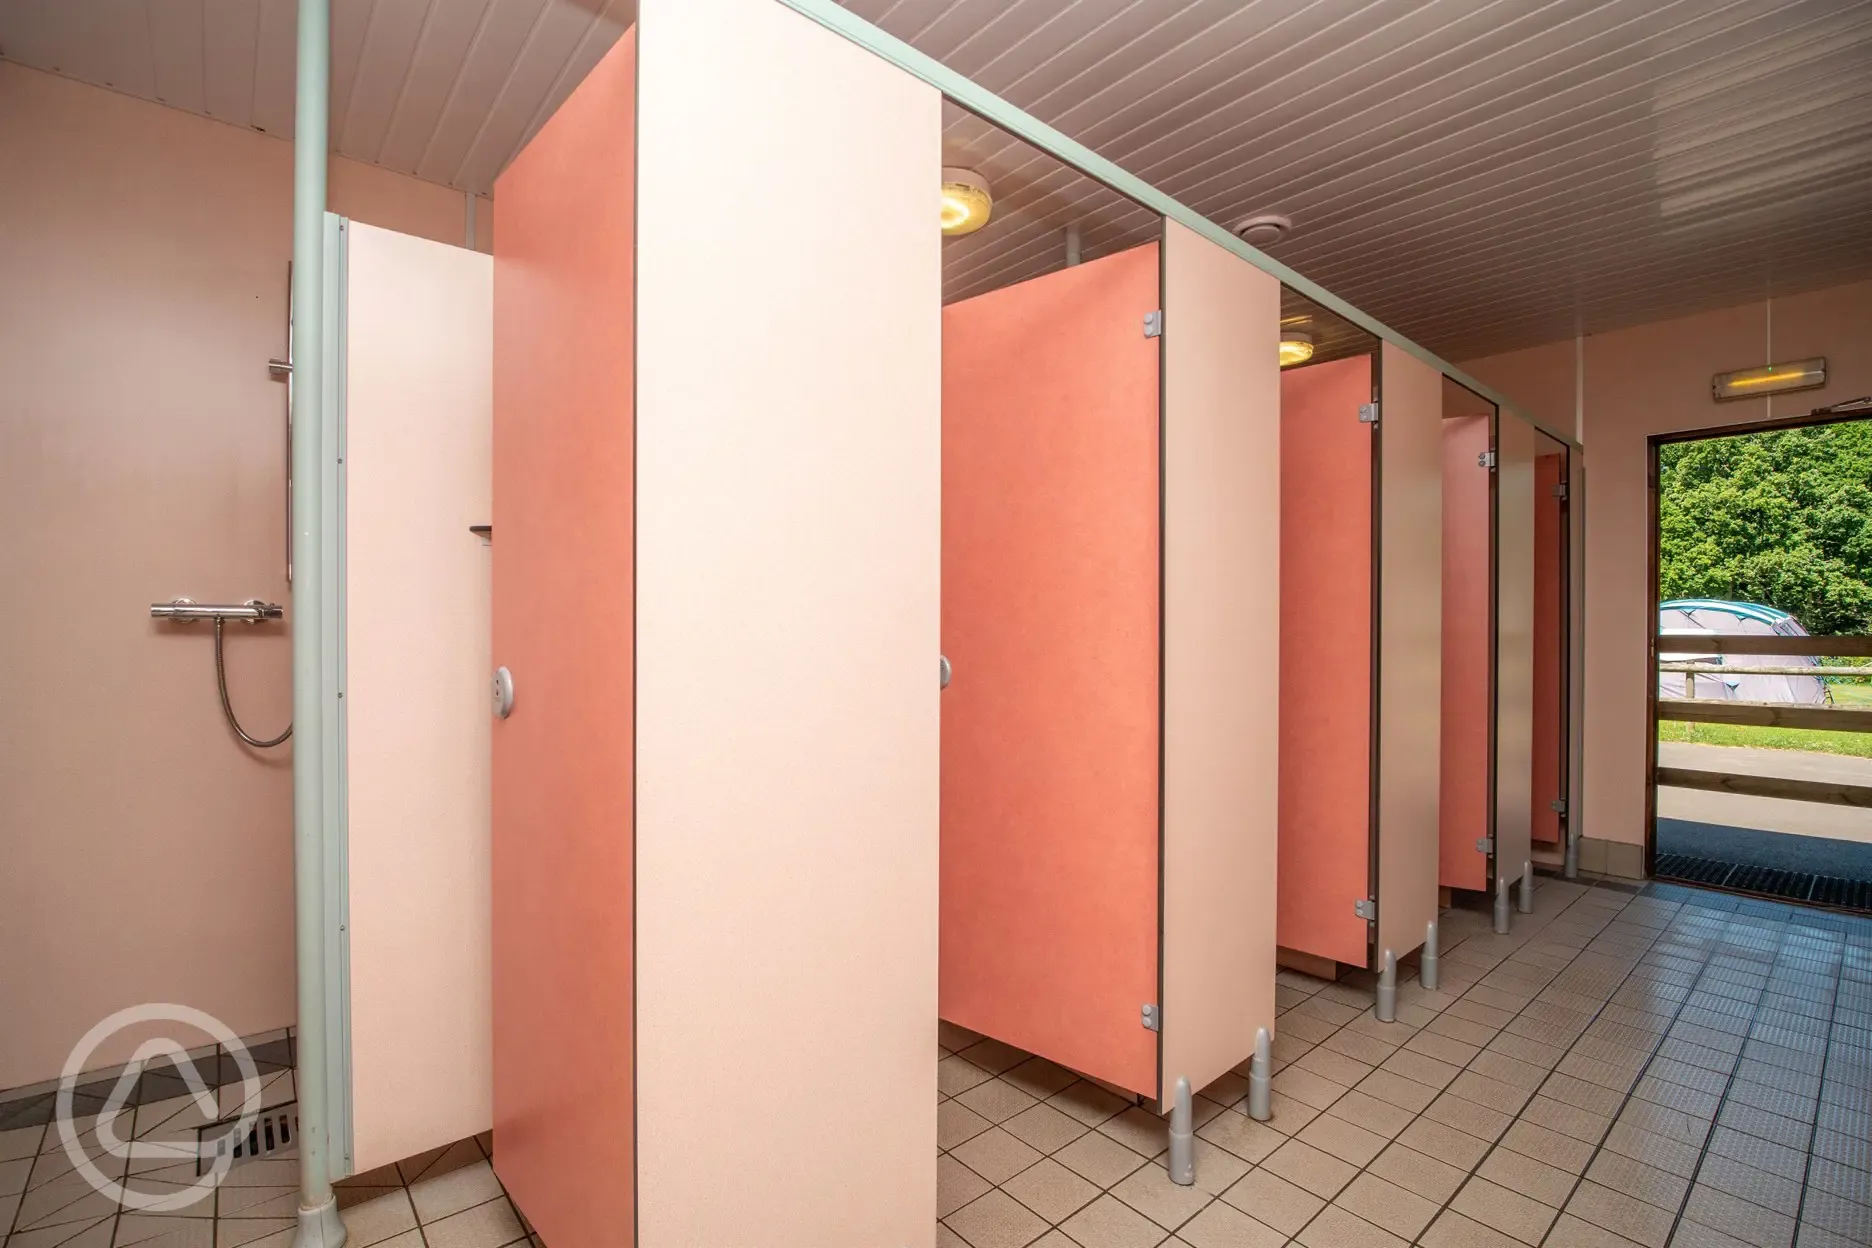 Shower cubicles nearby to pitching areas